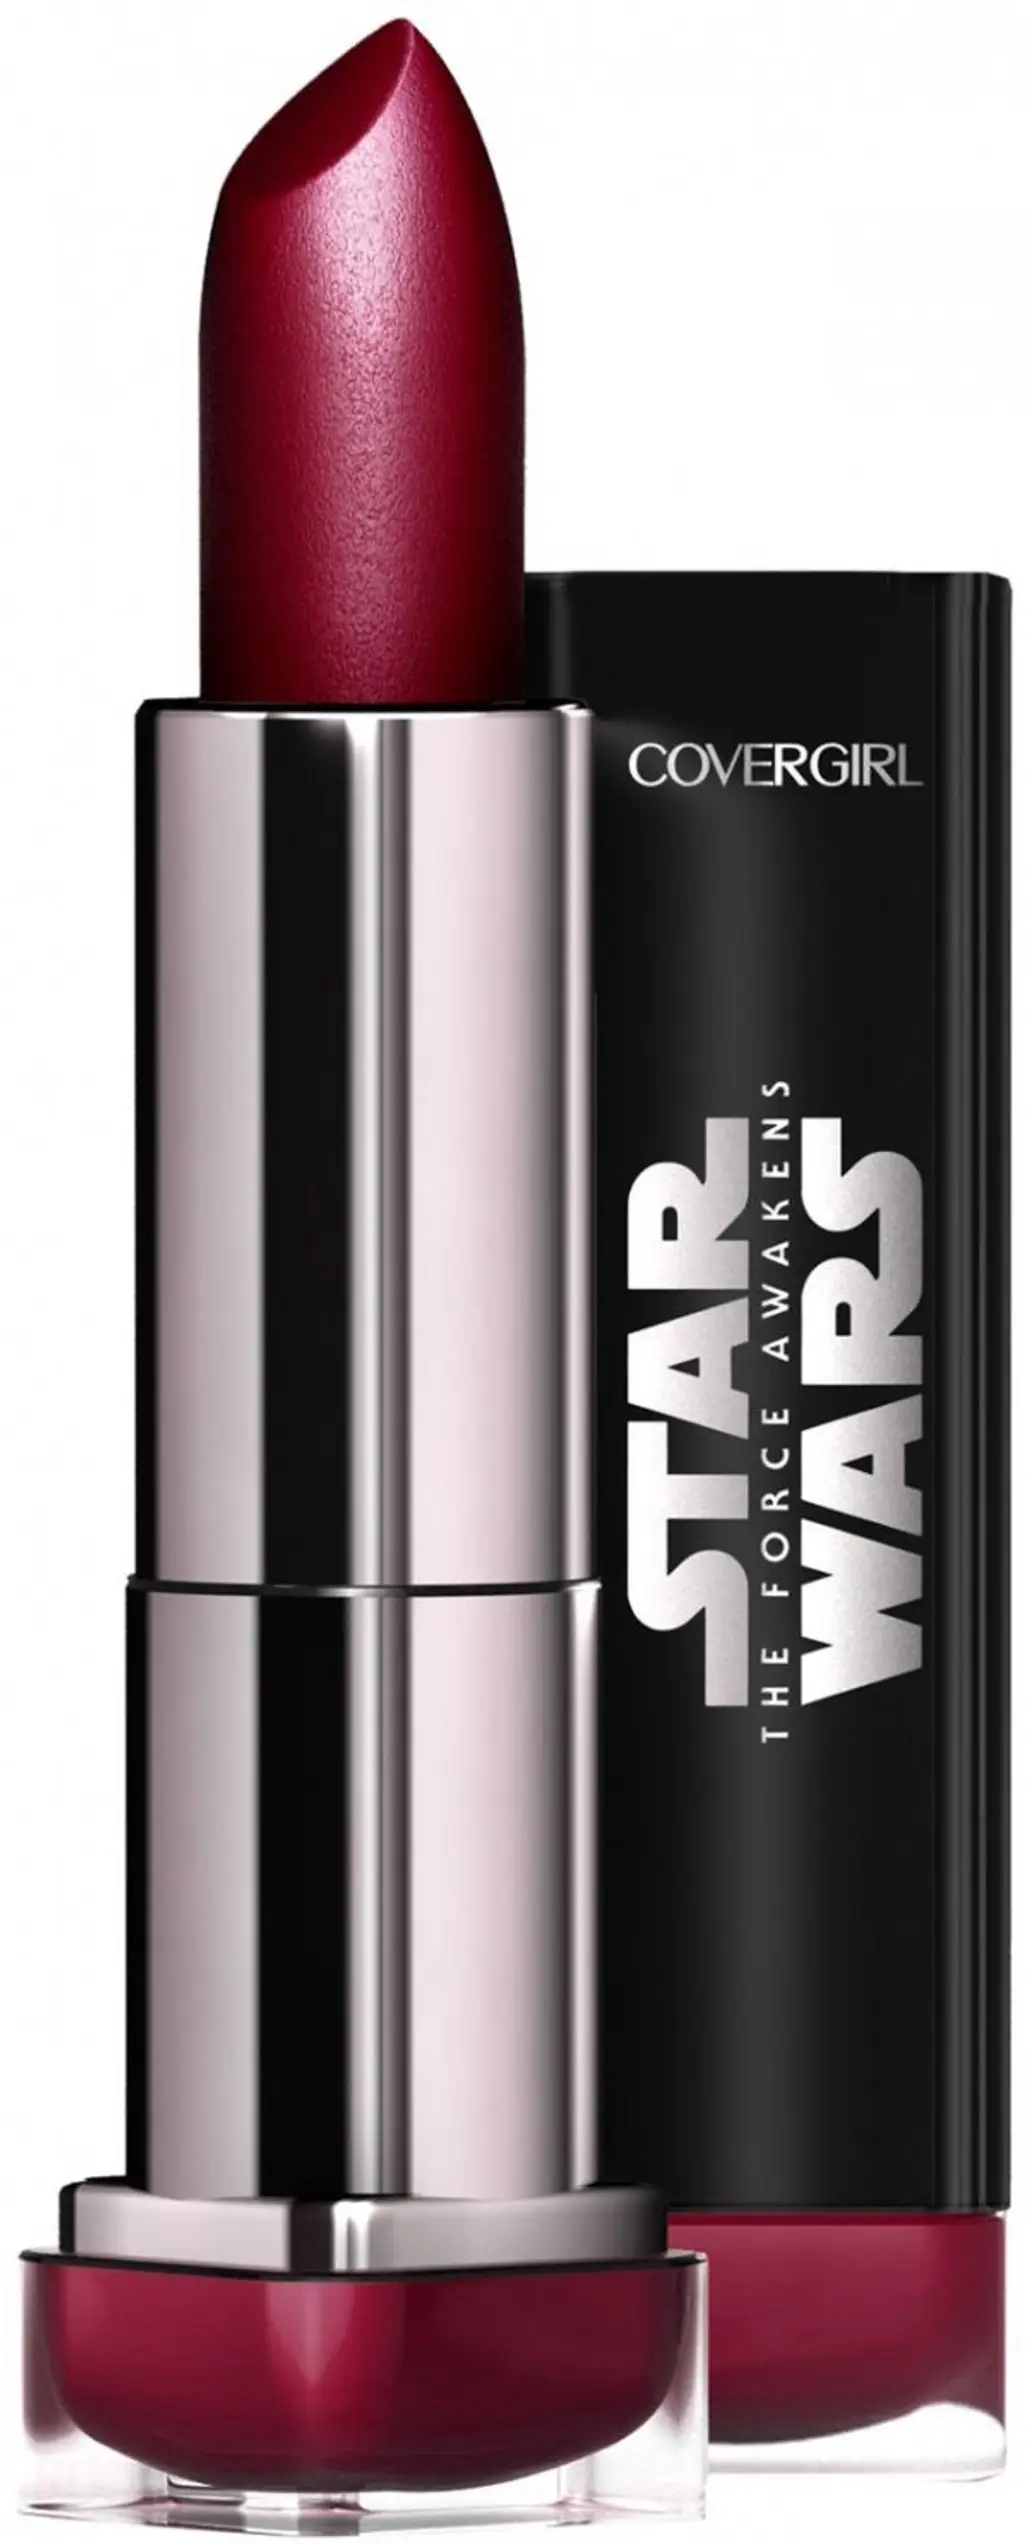 CoverGirl Star Wars Colorlicious Lipstick in Red